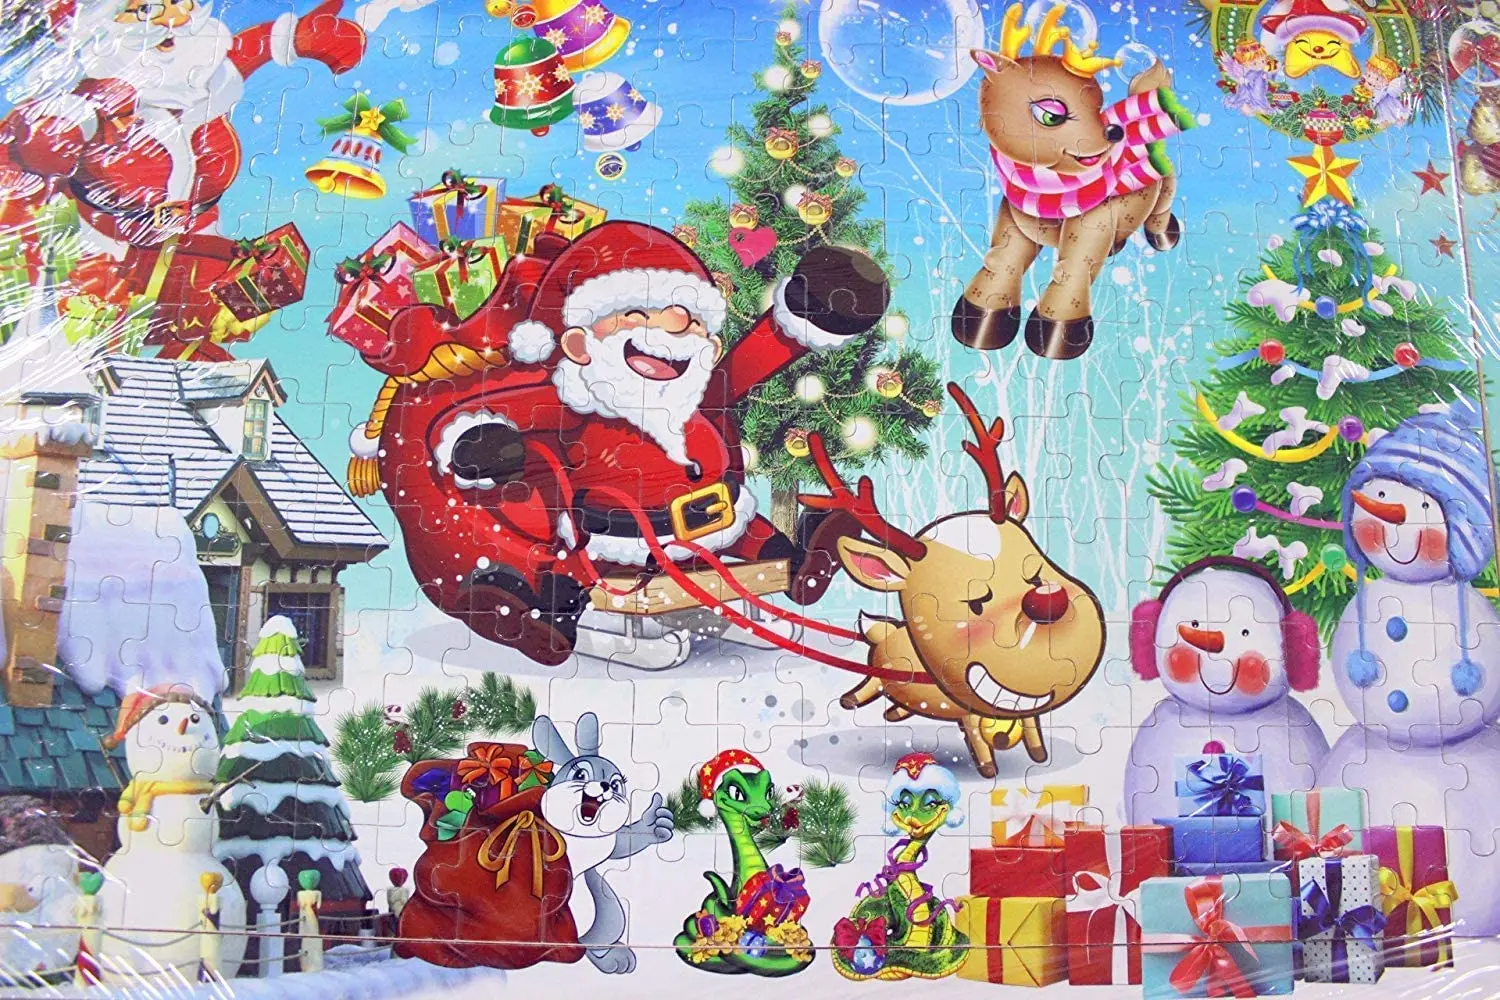 

Wooden Jigsaw Puzzle Merry Christmas Xmas Santa Claus Early Children Wooden Cartoon Toys